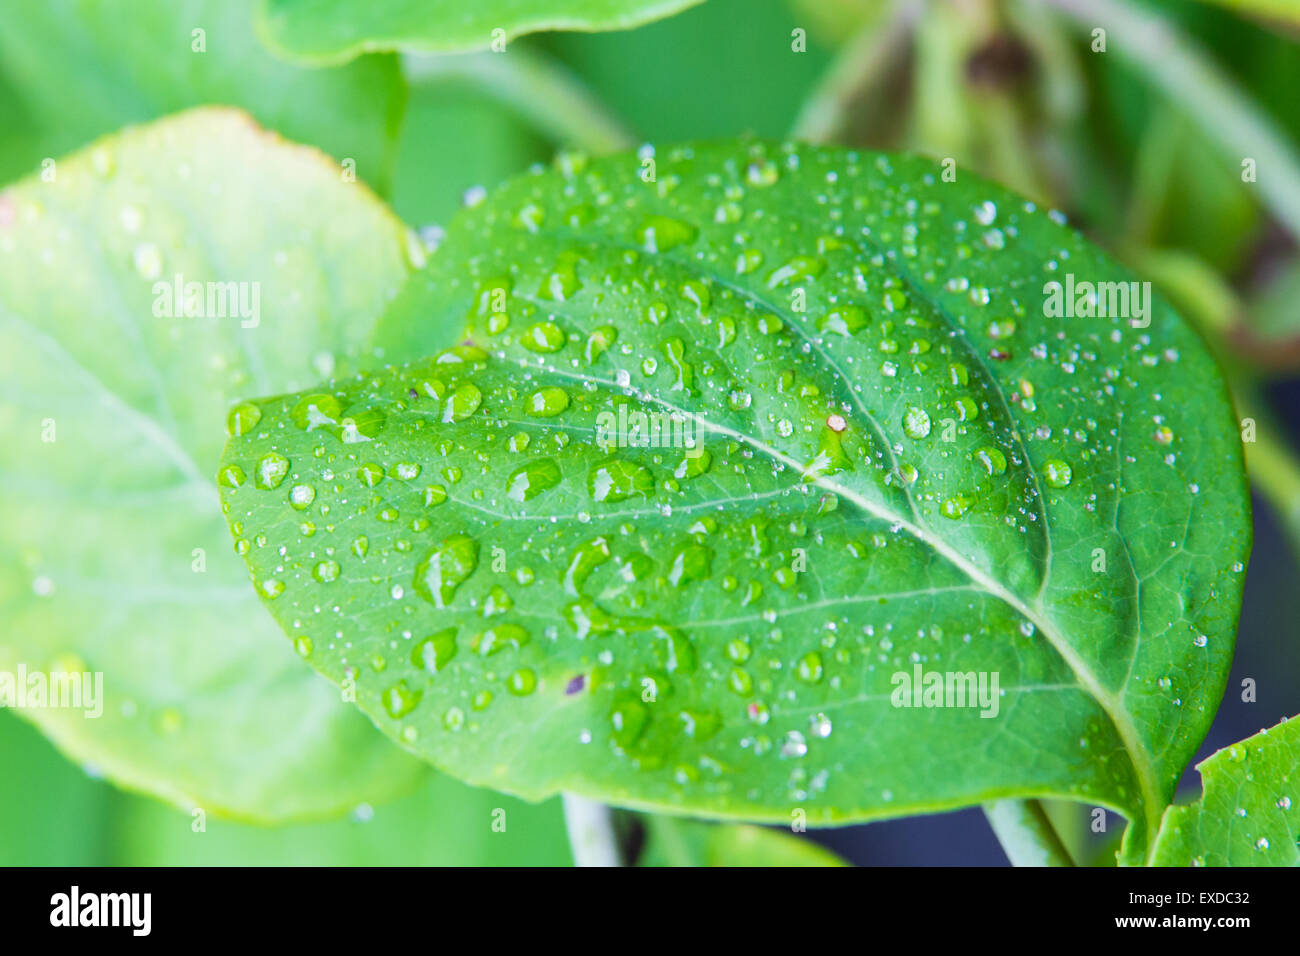 Isolated Large Green Leaf with Multiple Waterdrops Stock Photo